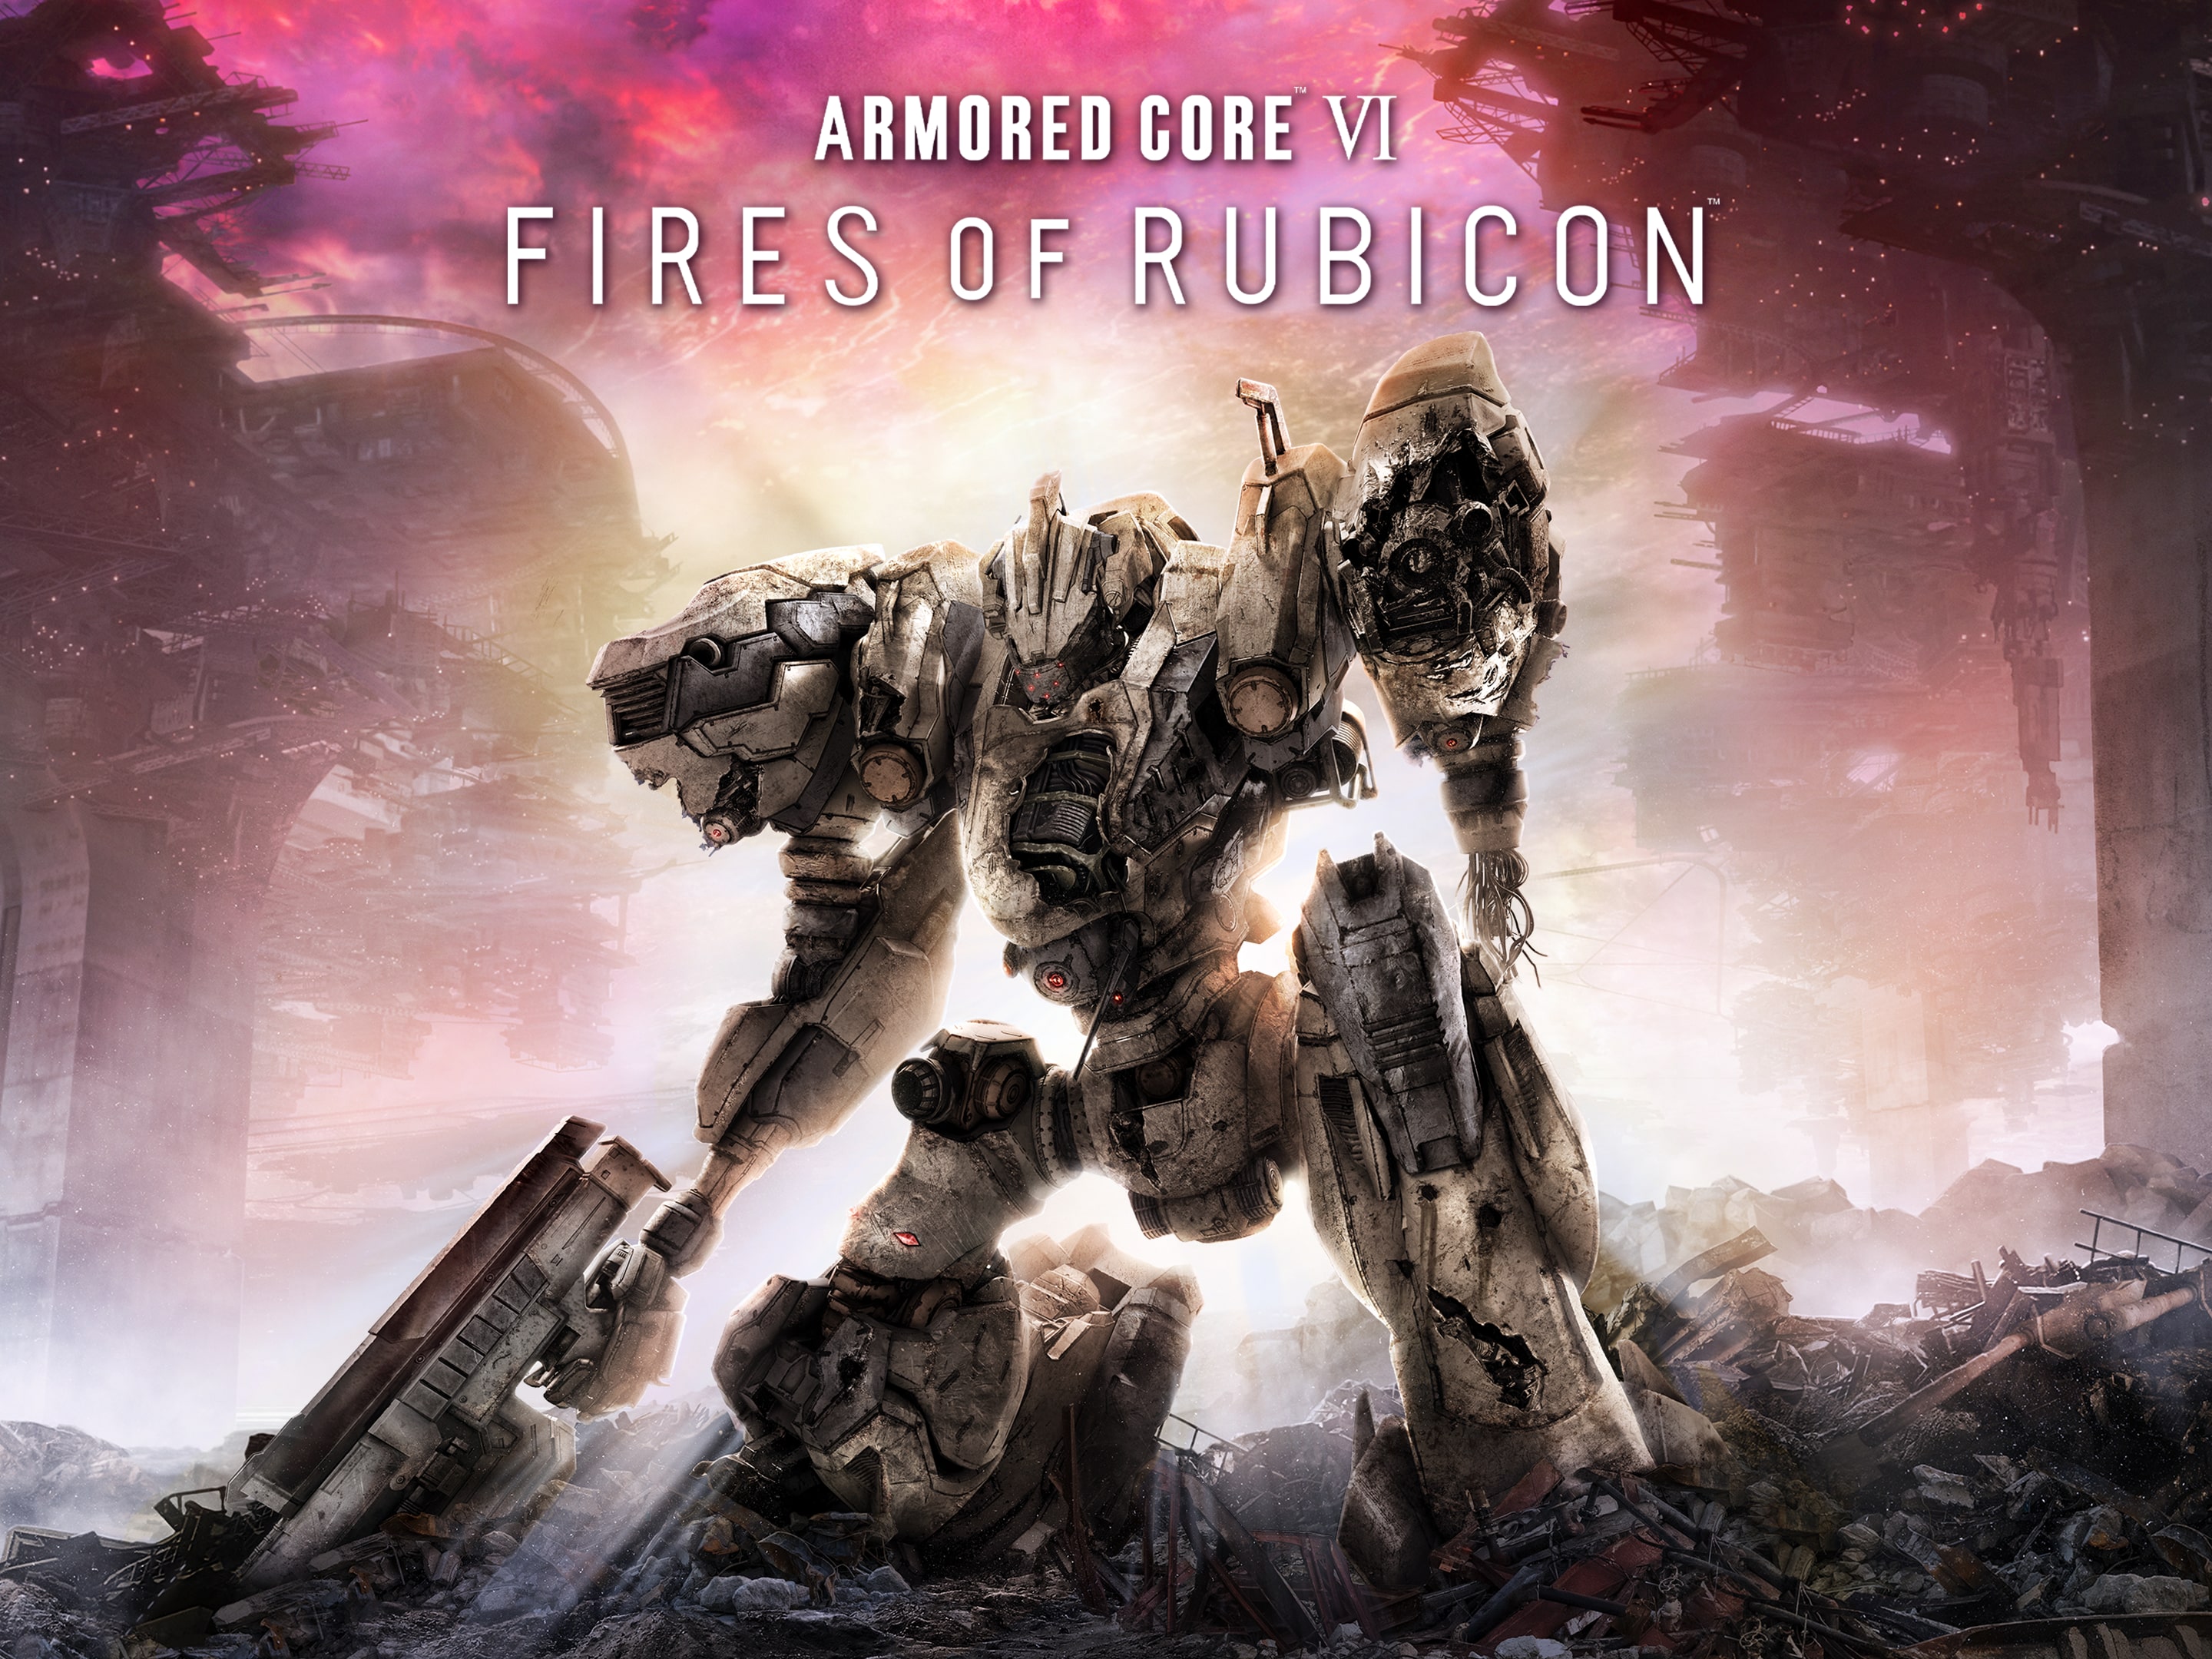 Armored Core VI Fires of Rubicon | PlayStation (US)